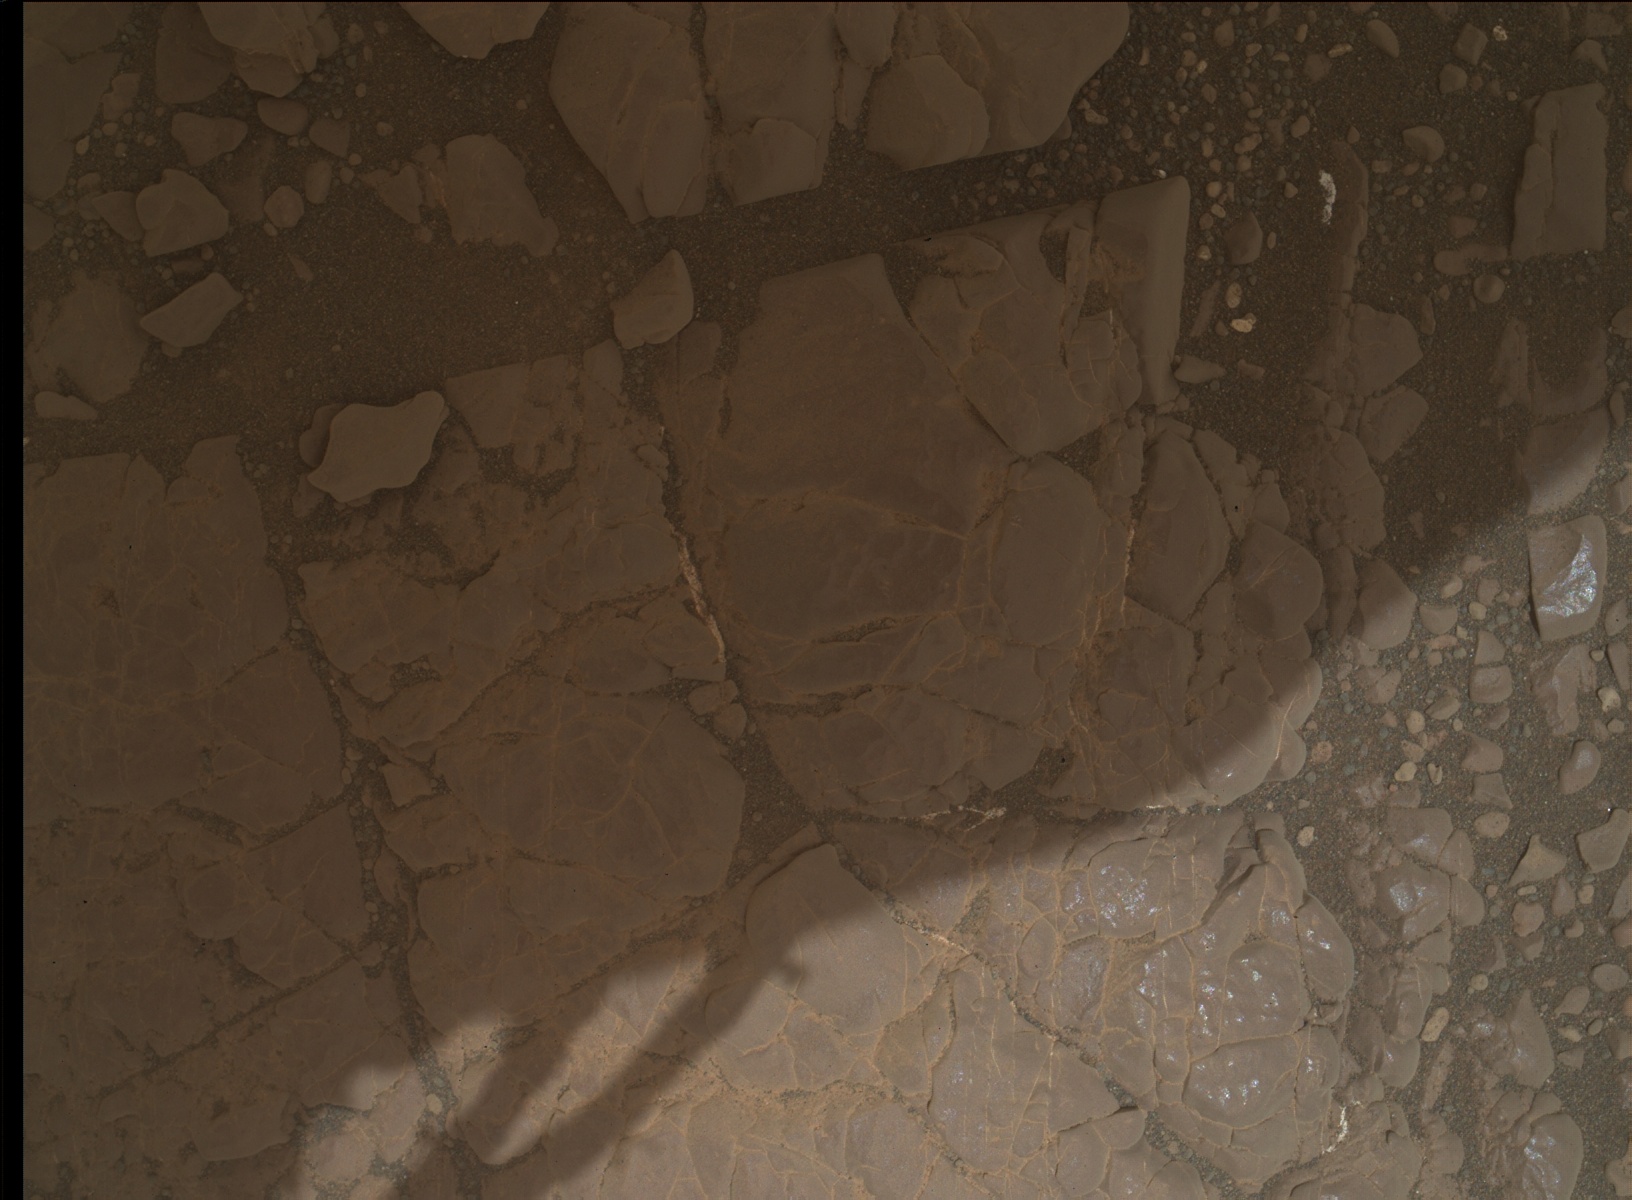 Nasa's Mars rover Curiosity acquired this image using its Mars Hand Lens Imager (MAHLI) on Sol 3022